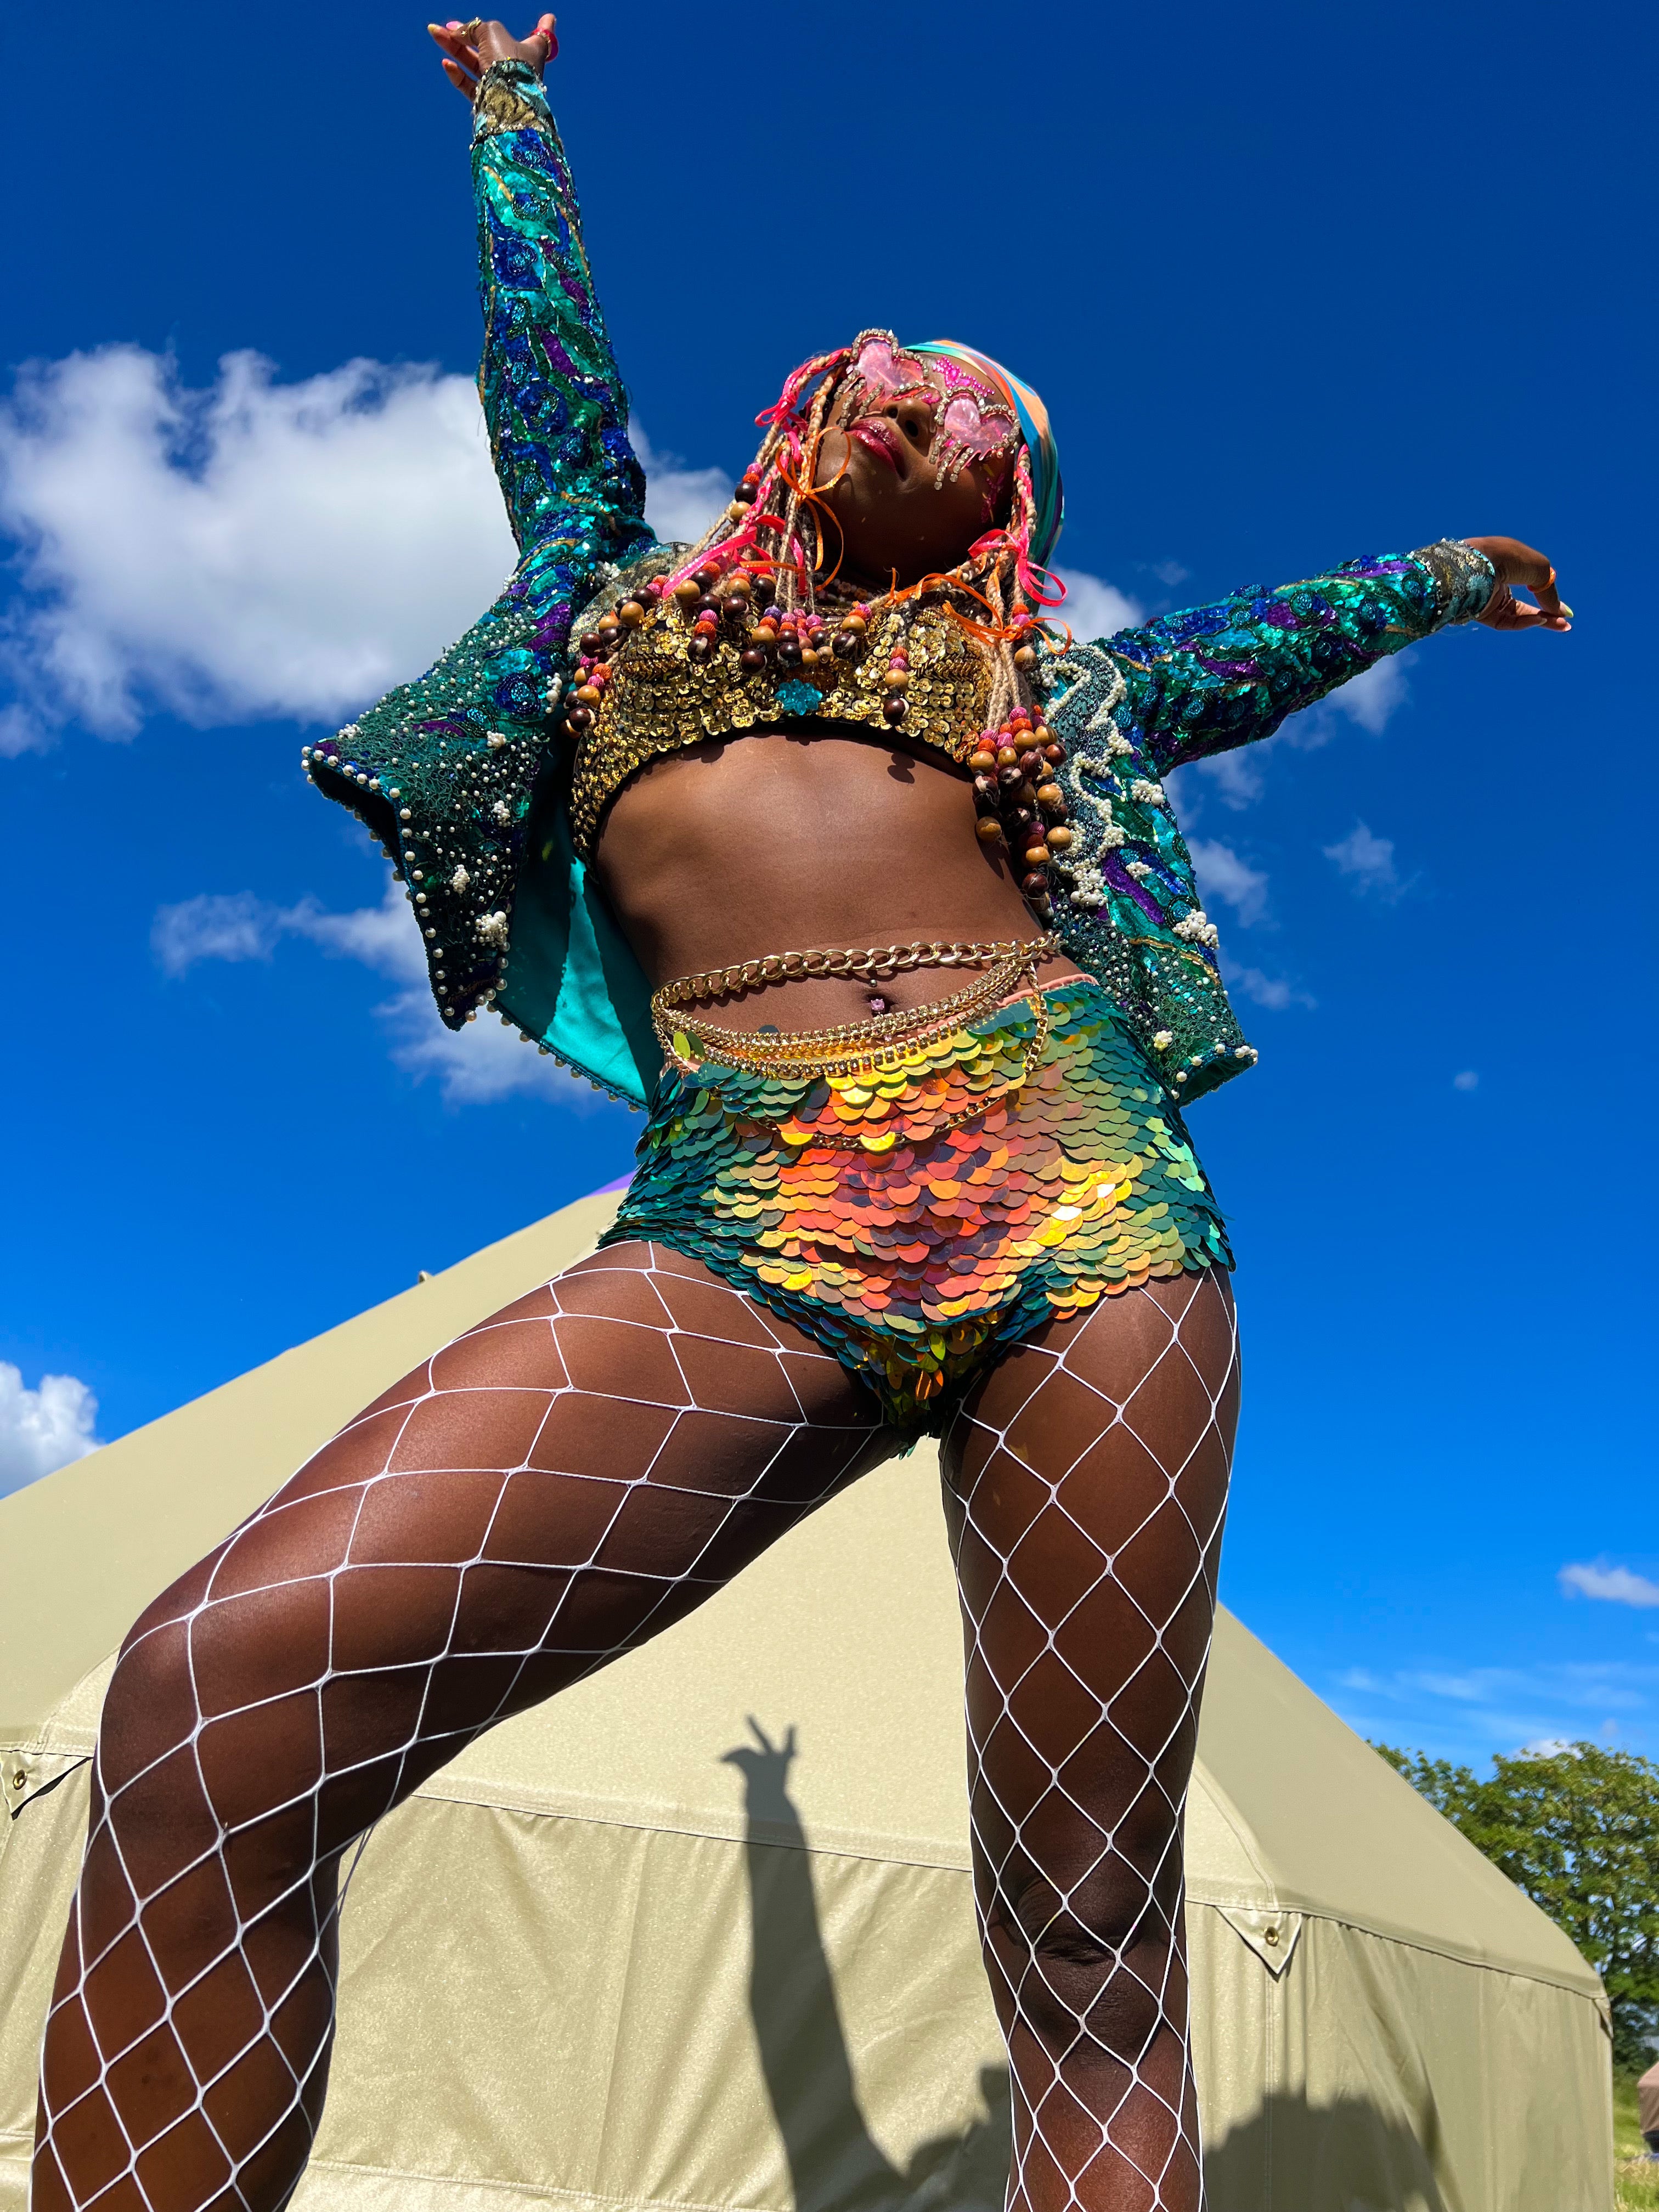 Up facing view of woman posing with her arms in the blue sky in front of a tipi tent wearing sparkly festival outfit including Rosa Bloom sequin hot pants